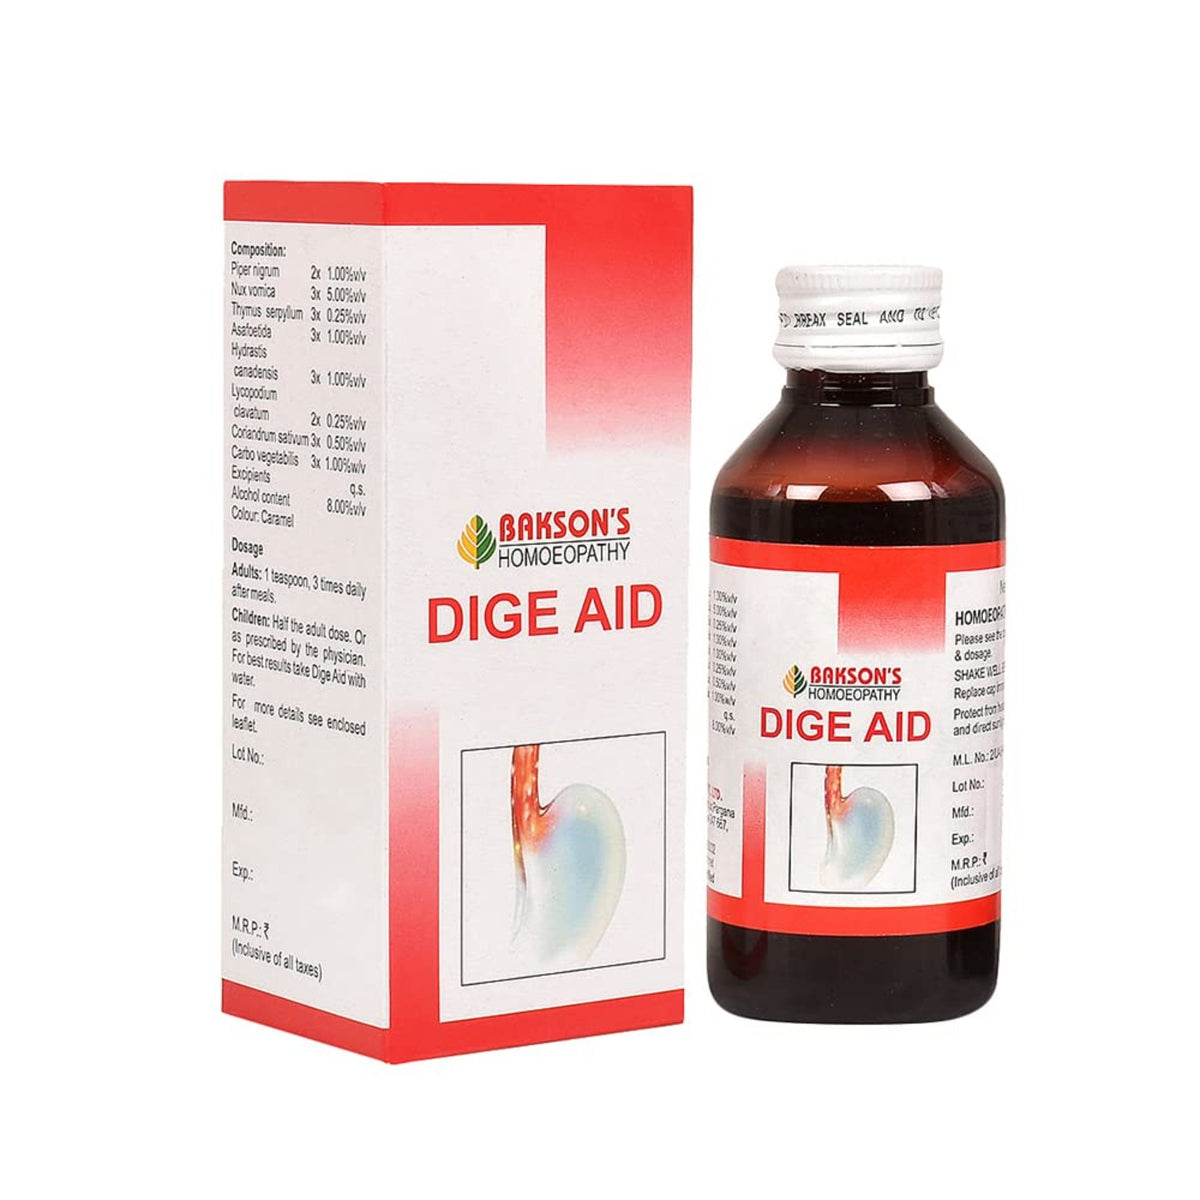 Bakson's Homoeopathy Dige Aid Aids Digestion Syrup